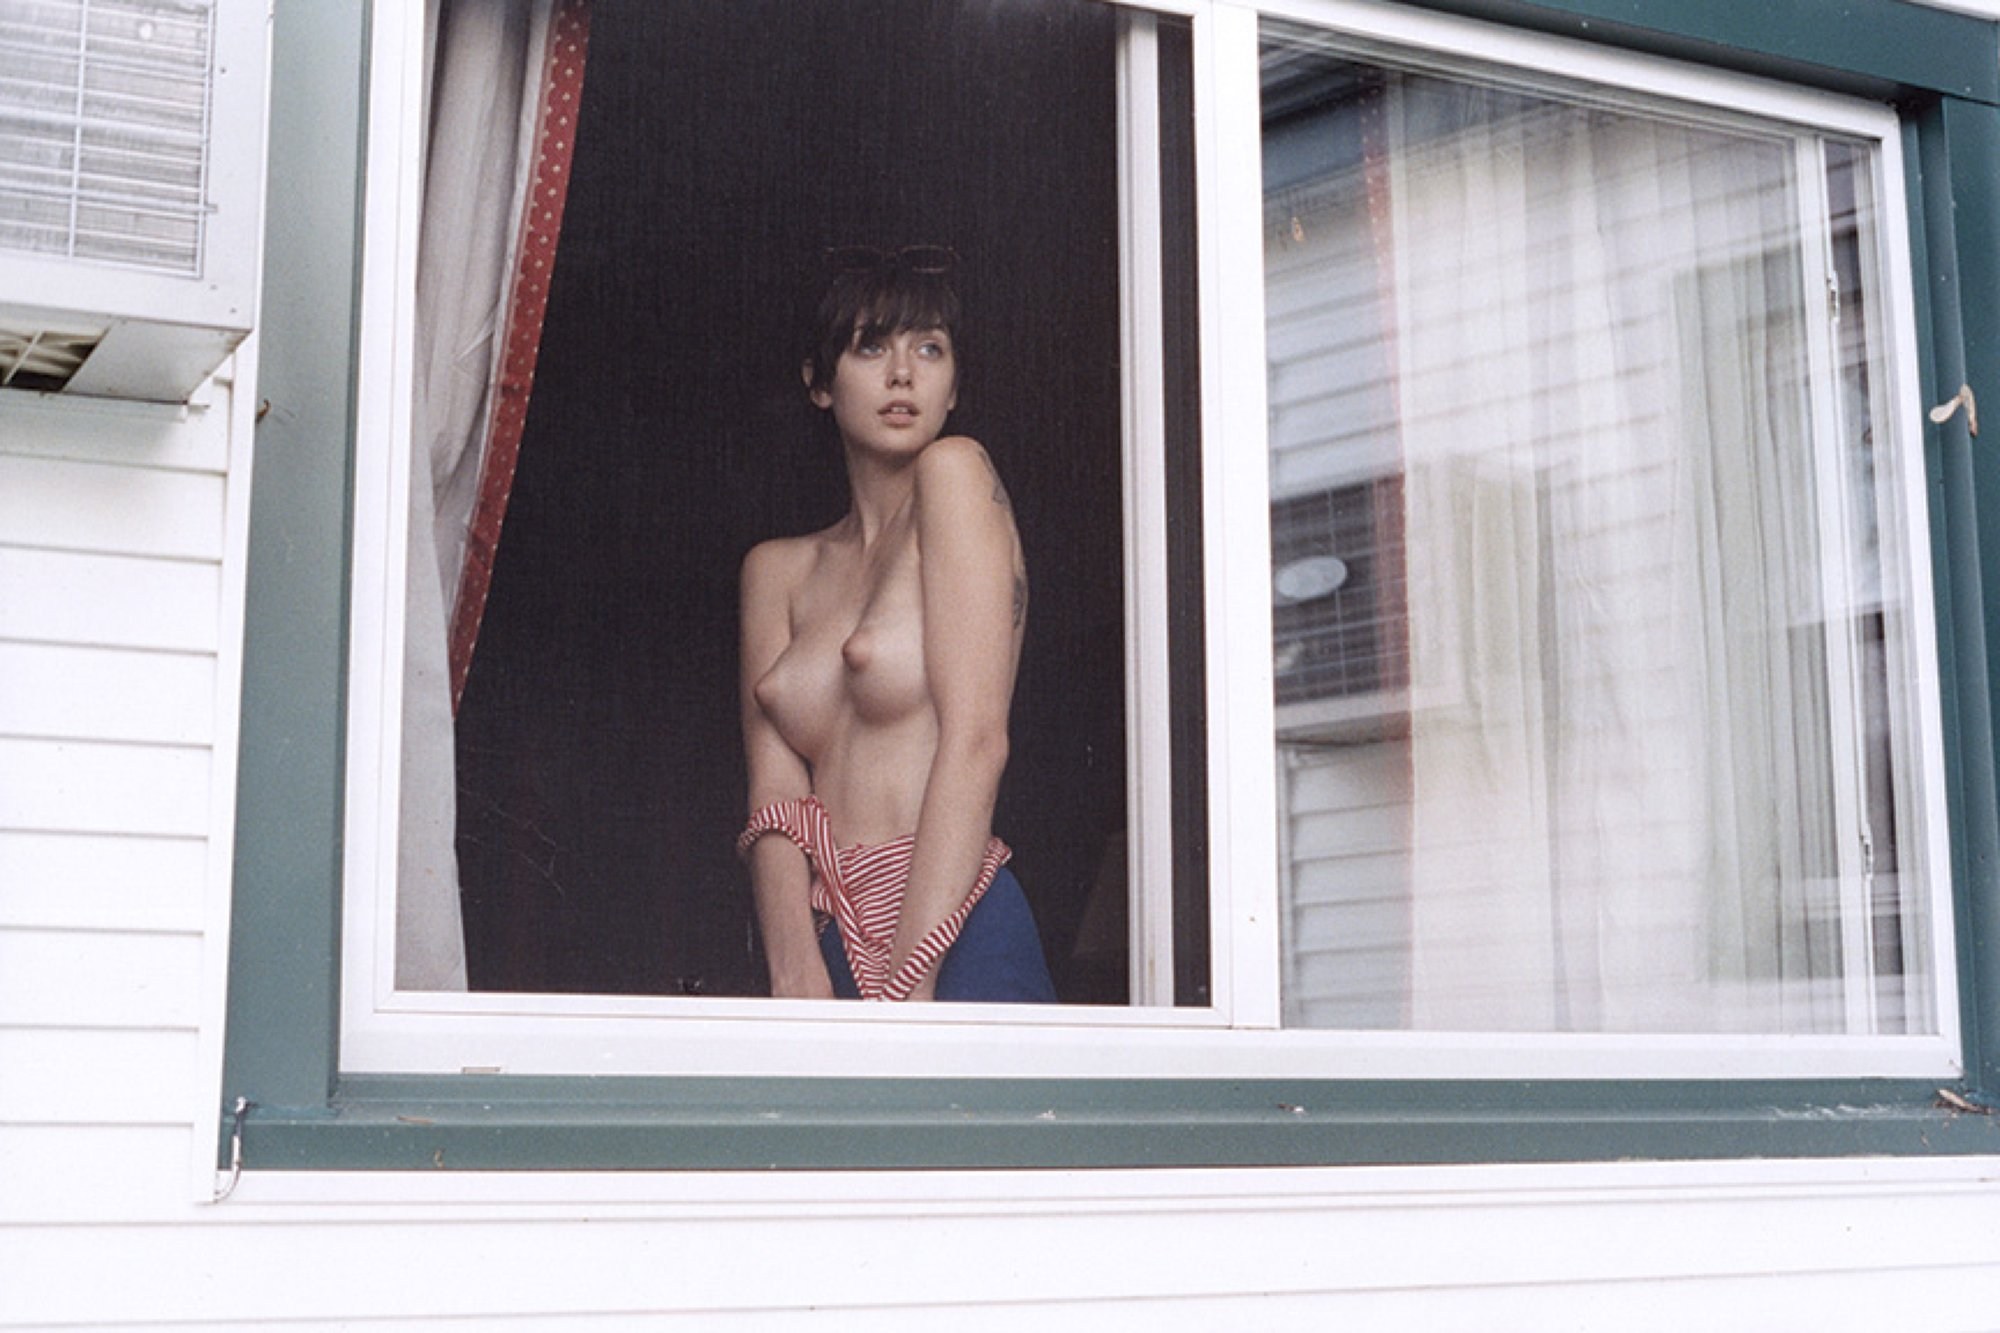 Naked Women in the Window (74 photos)